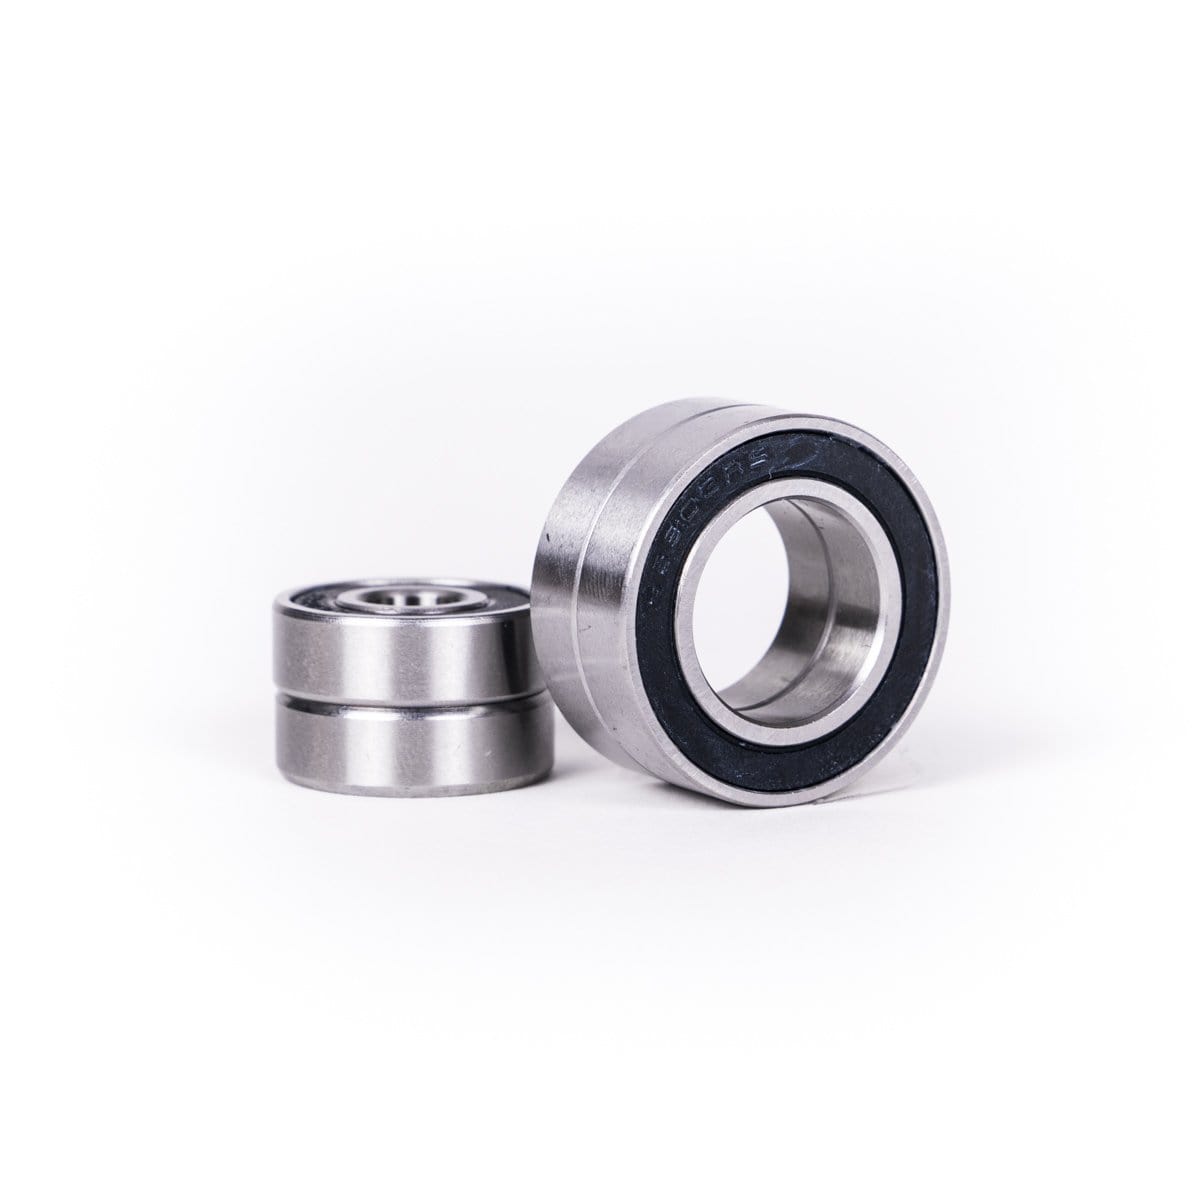 Boosted Bearing Service Kit for Boosted Boards